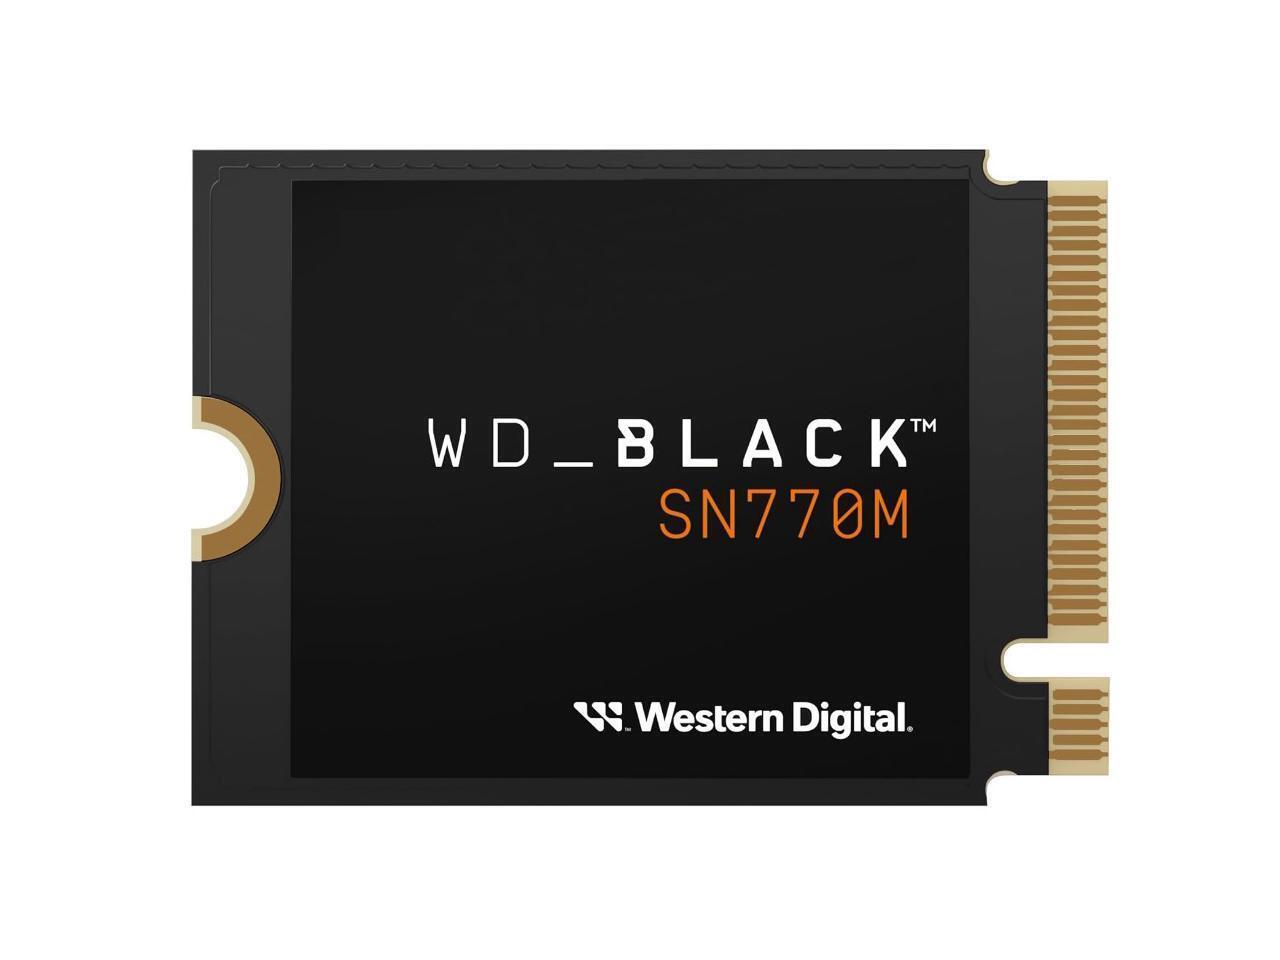 WD_BLACK 2TB SN770M M.2 2230 NVMe SSD for Handheld Gaming Devices